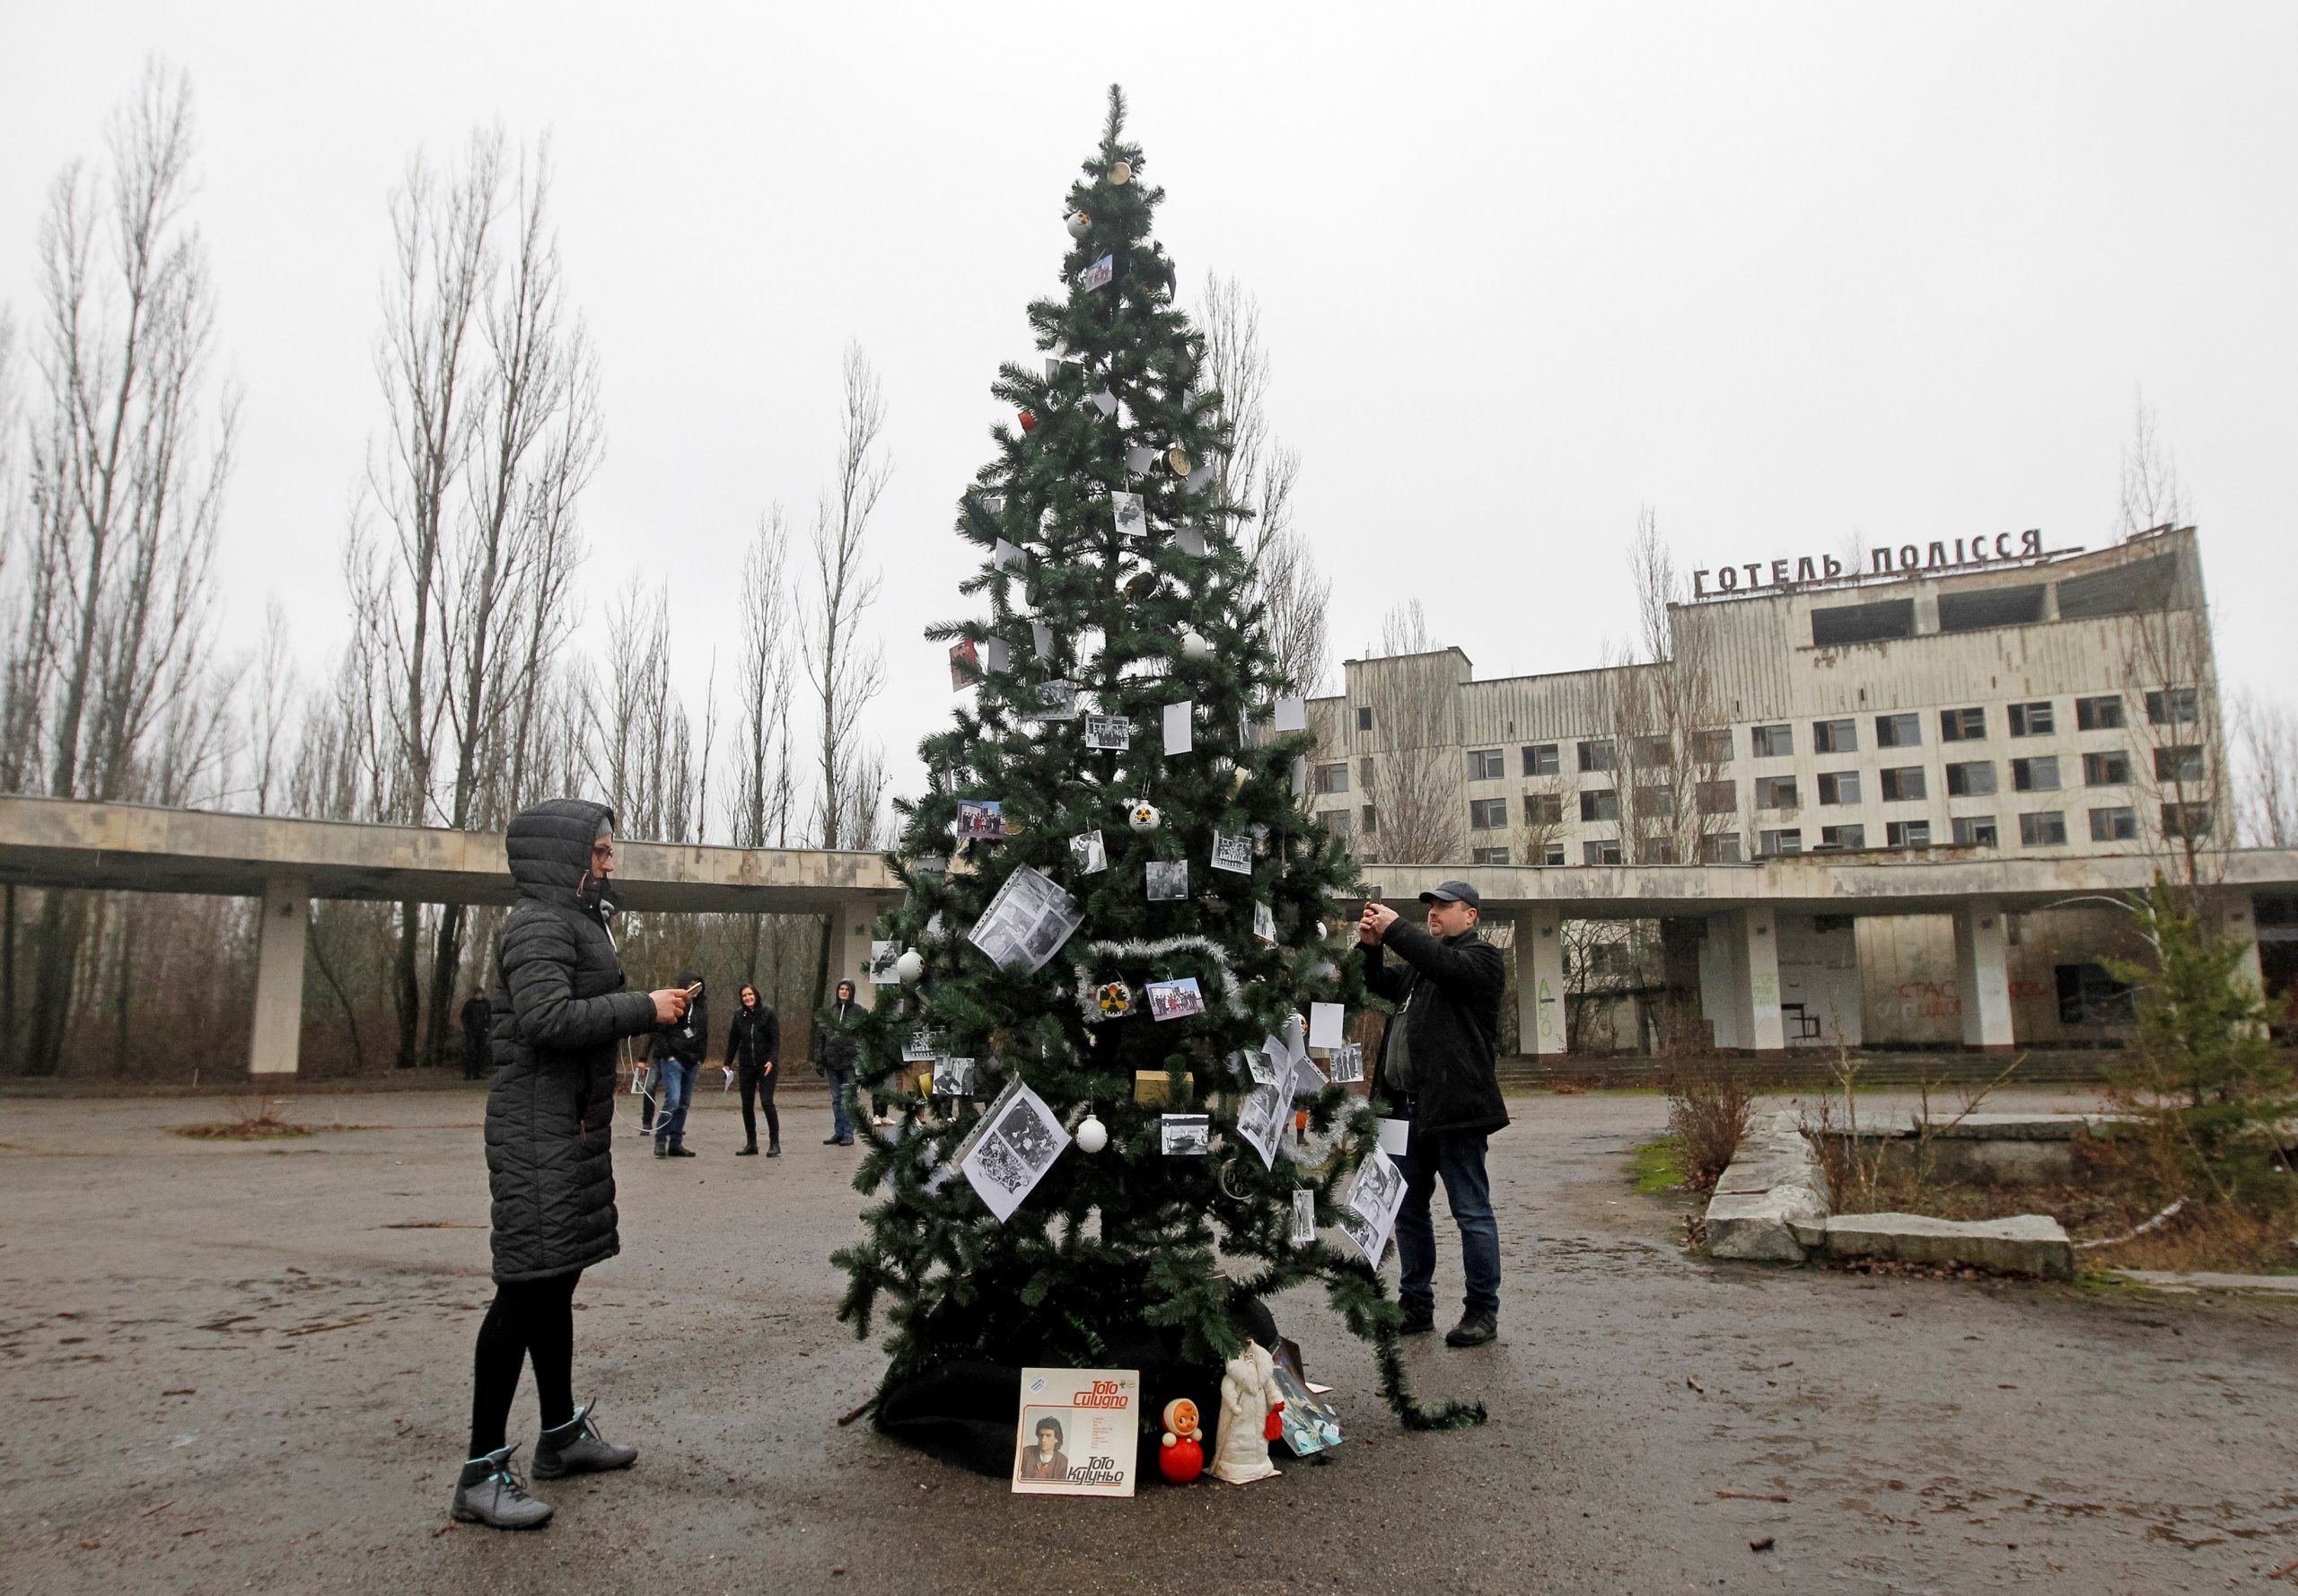 epa08090044 A Christmas tree with photos of former residents is installed on a central square of the abandoned city of Pripyat, not far from the Chernobyl nuclear power station, Ukraine, 25 December 2019. For the first time in 33 years, the Christmas tree was set up in Pripyat at the Chornobyl Exclusion Zone. Eighteen former residents of Pripyat who had not been in their hometown for many years decorated the Cristmass tree with their family photos taken in Pripyat when the city was not yet evicted. In the early hours of 26 April 1986 the Unit 4 reactor at the Chernobyl power station blew apart. Facing nuclear disaster on unprecedented scale, Soviet authorities tried to contain the situation by sending thousands of ill-equipped men into a radioactive maelstrom. The explosion of Unit 4 of the Chernobyl nuclear power plant is still regarded the biggest accident in the history of nuclear power generation.  EPA/STEPAN FRANKO